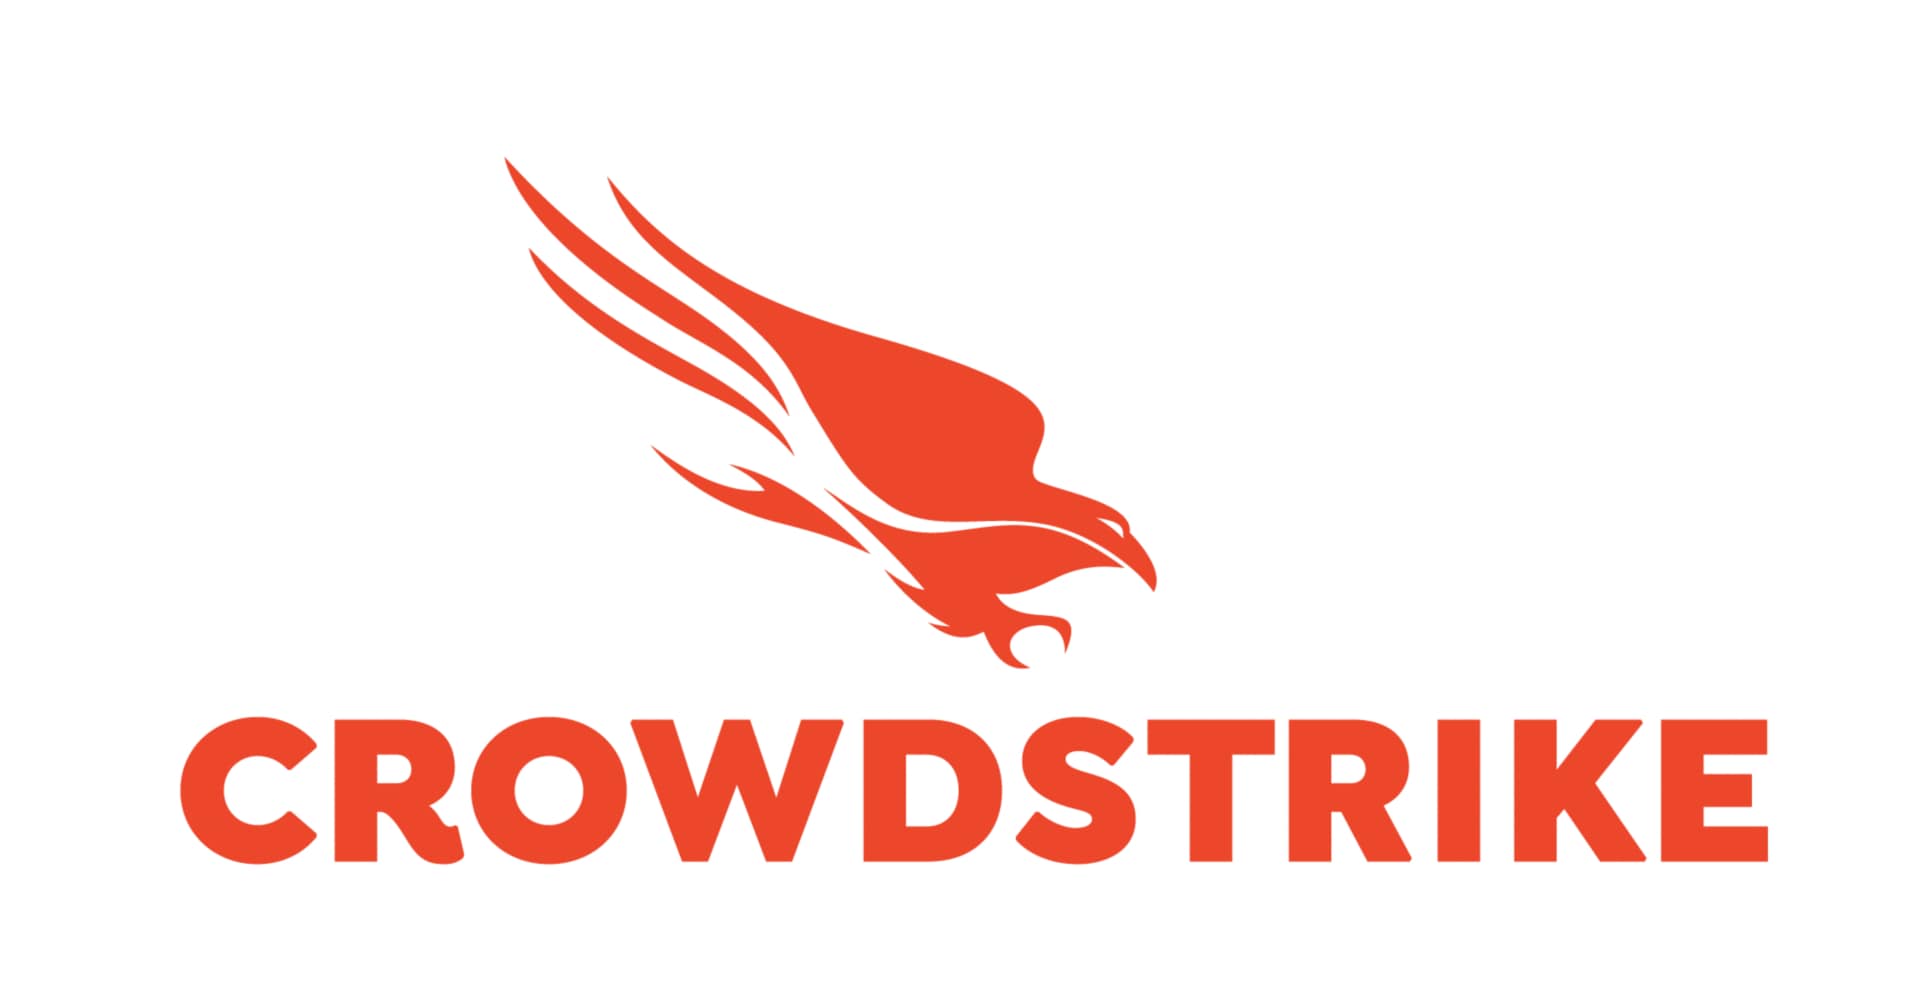 CrowdStrike 13-Month Falcon Identity Threat Detection Software Subscription